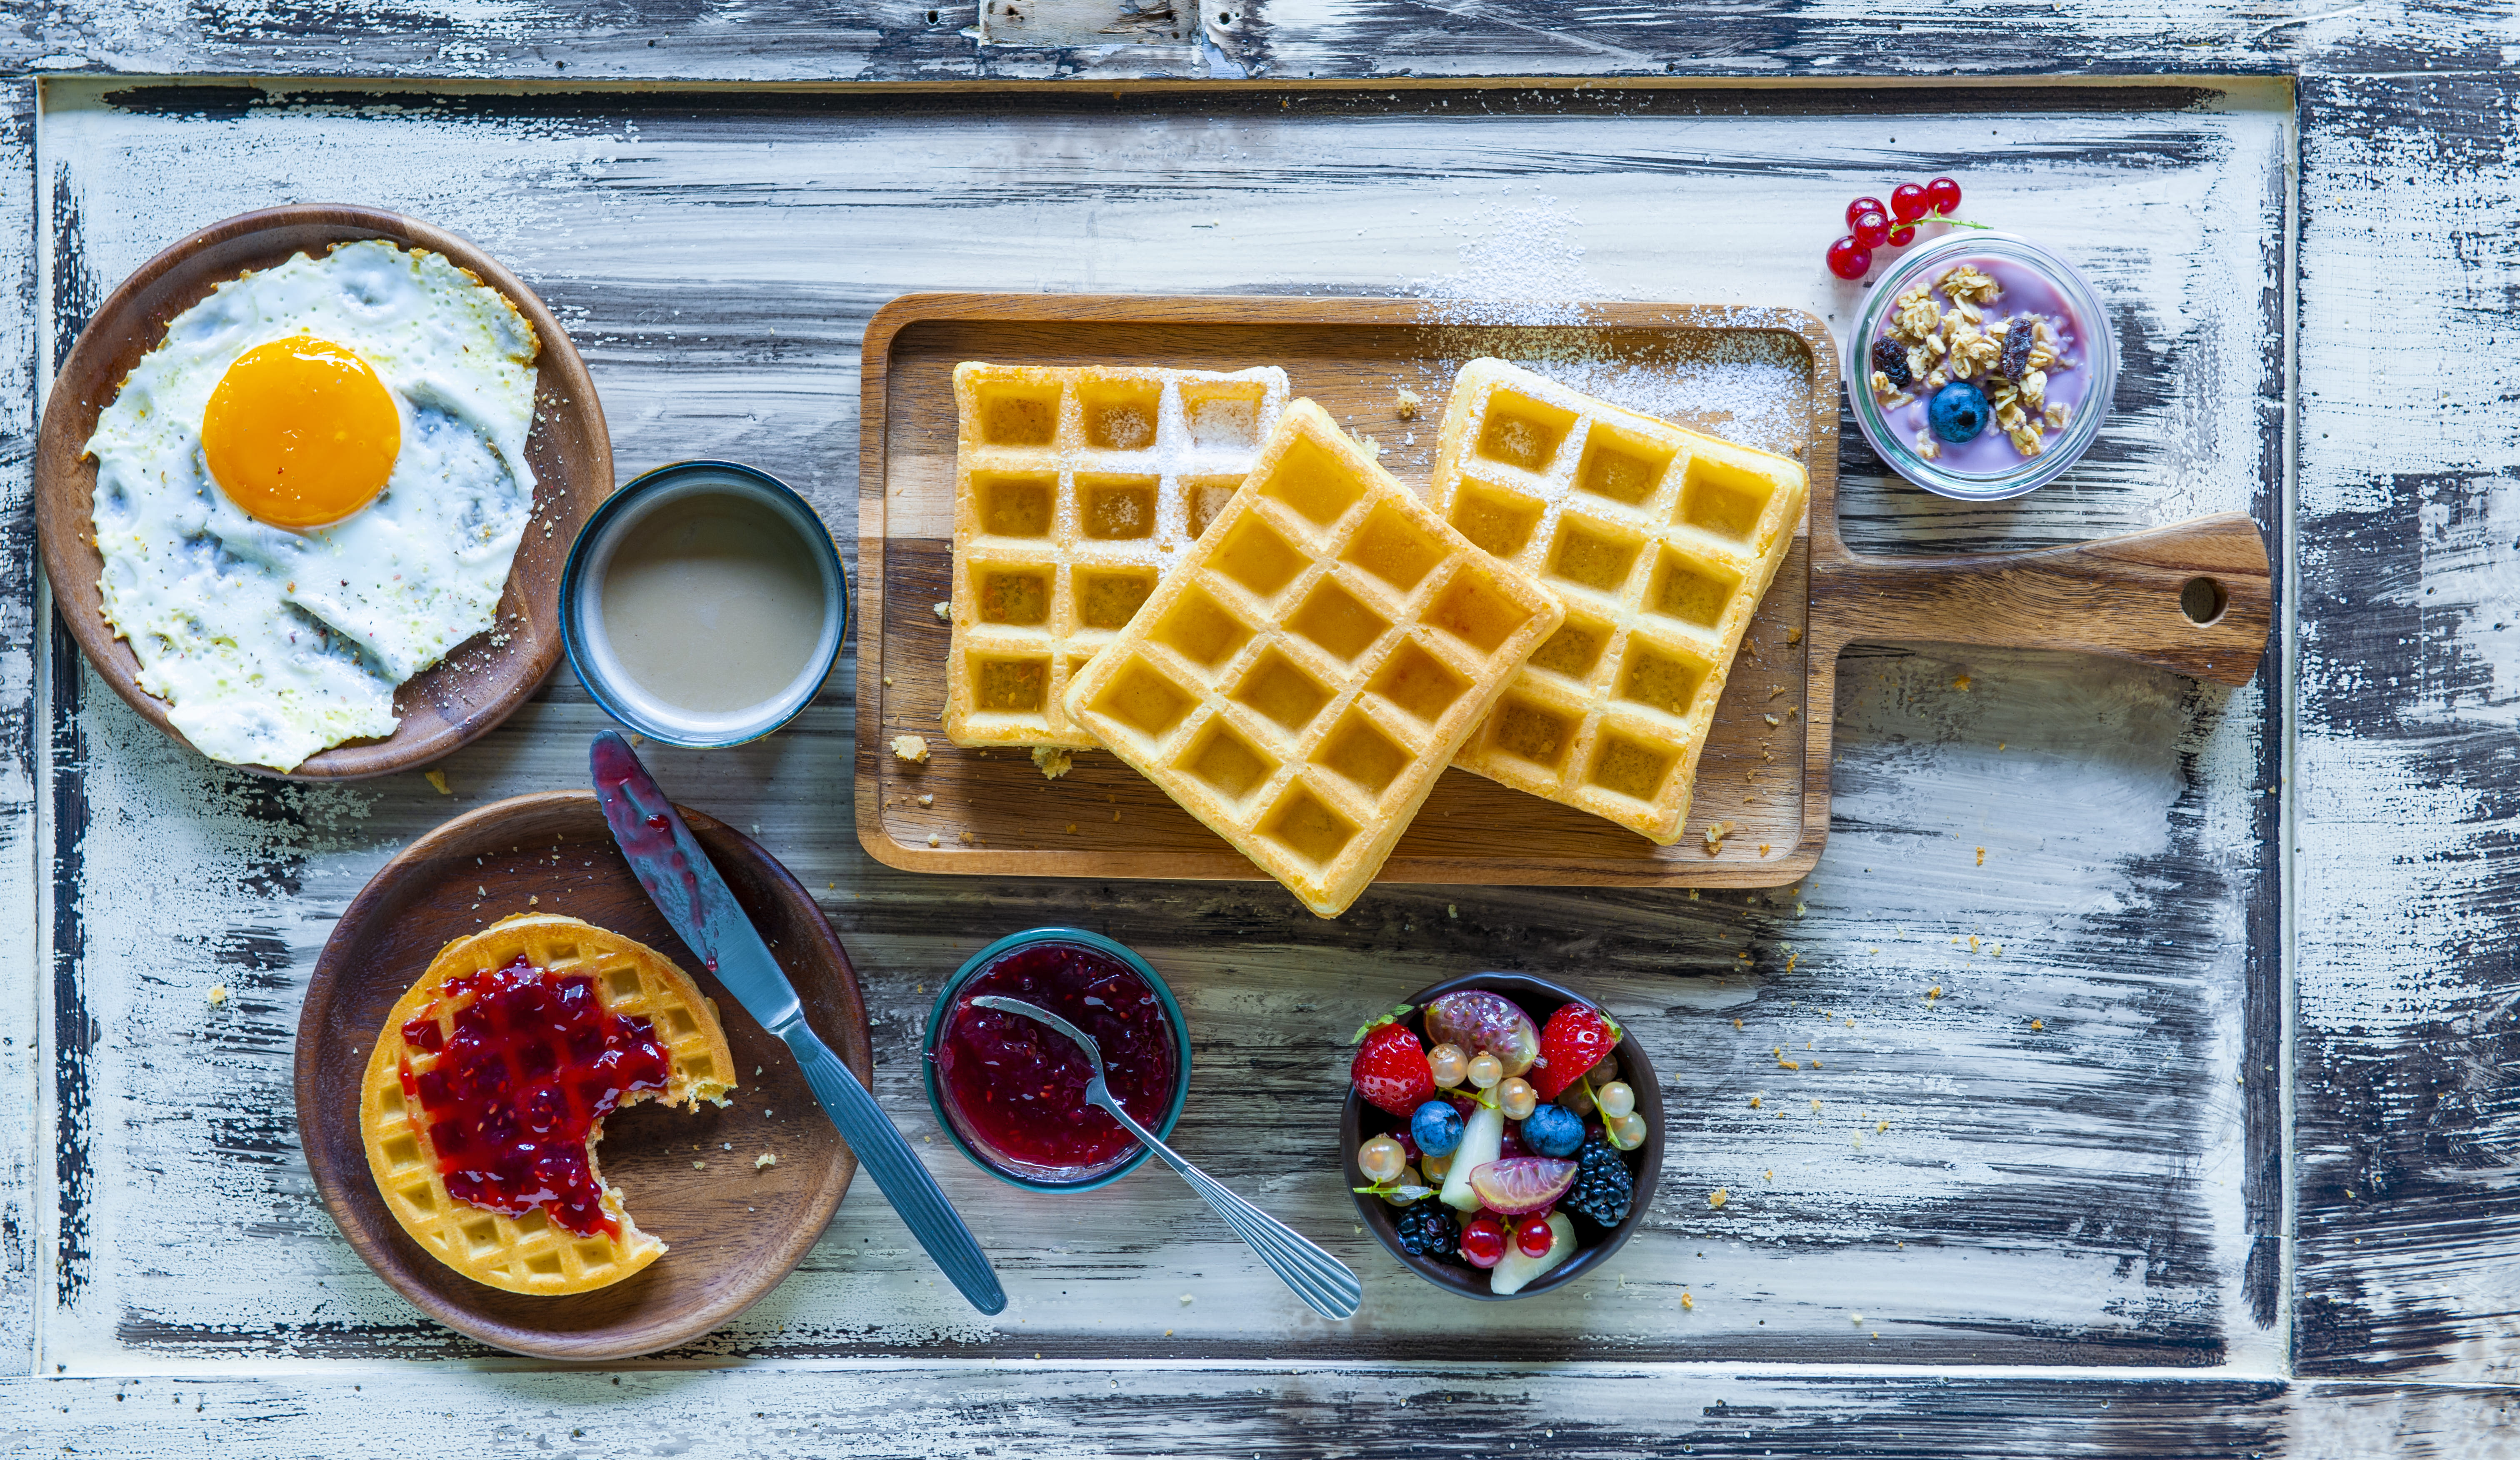 Dely’s freezer-fresh Belgian waffles are a treat for the world